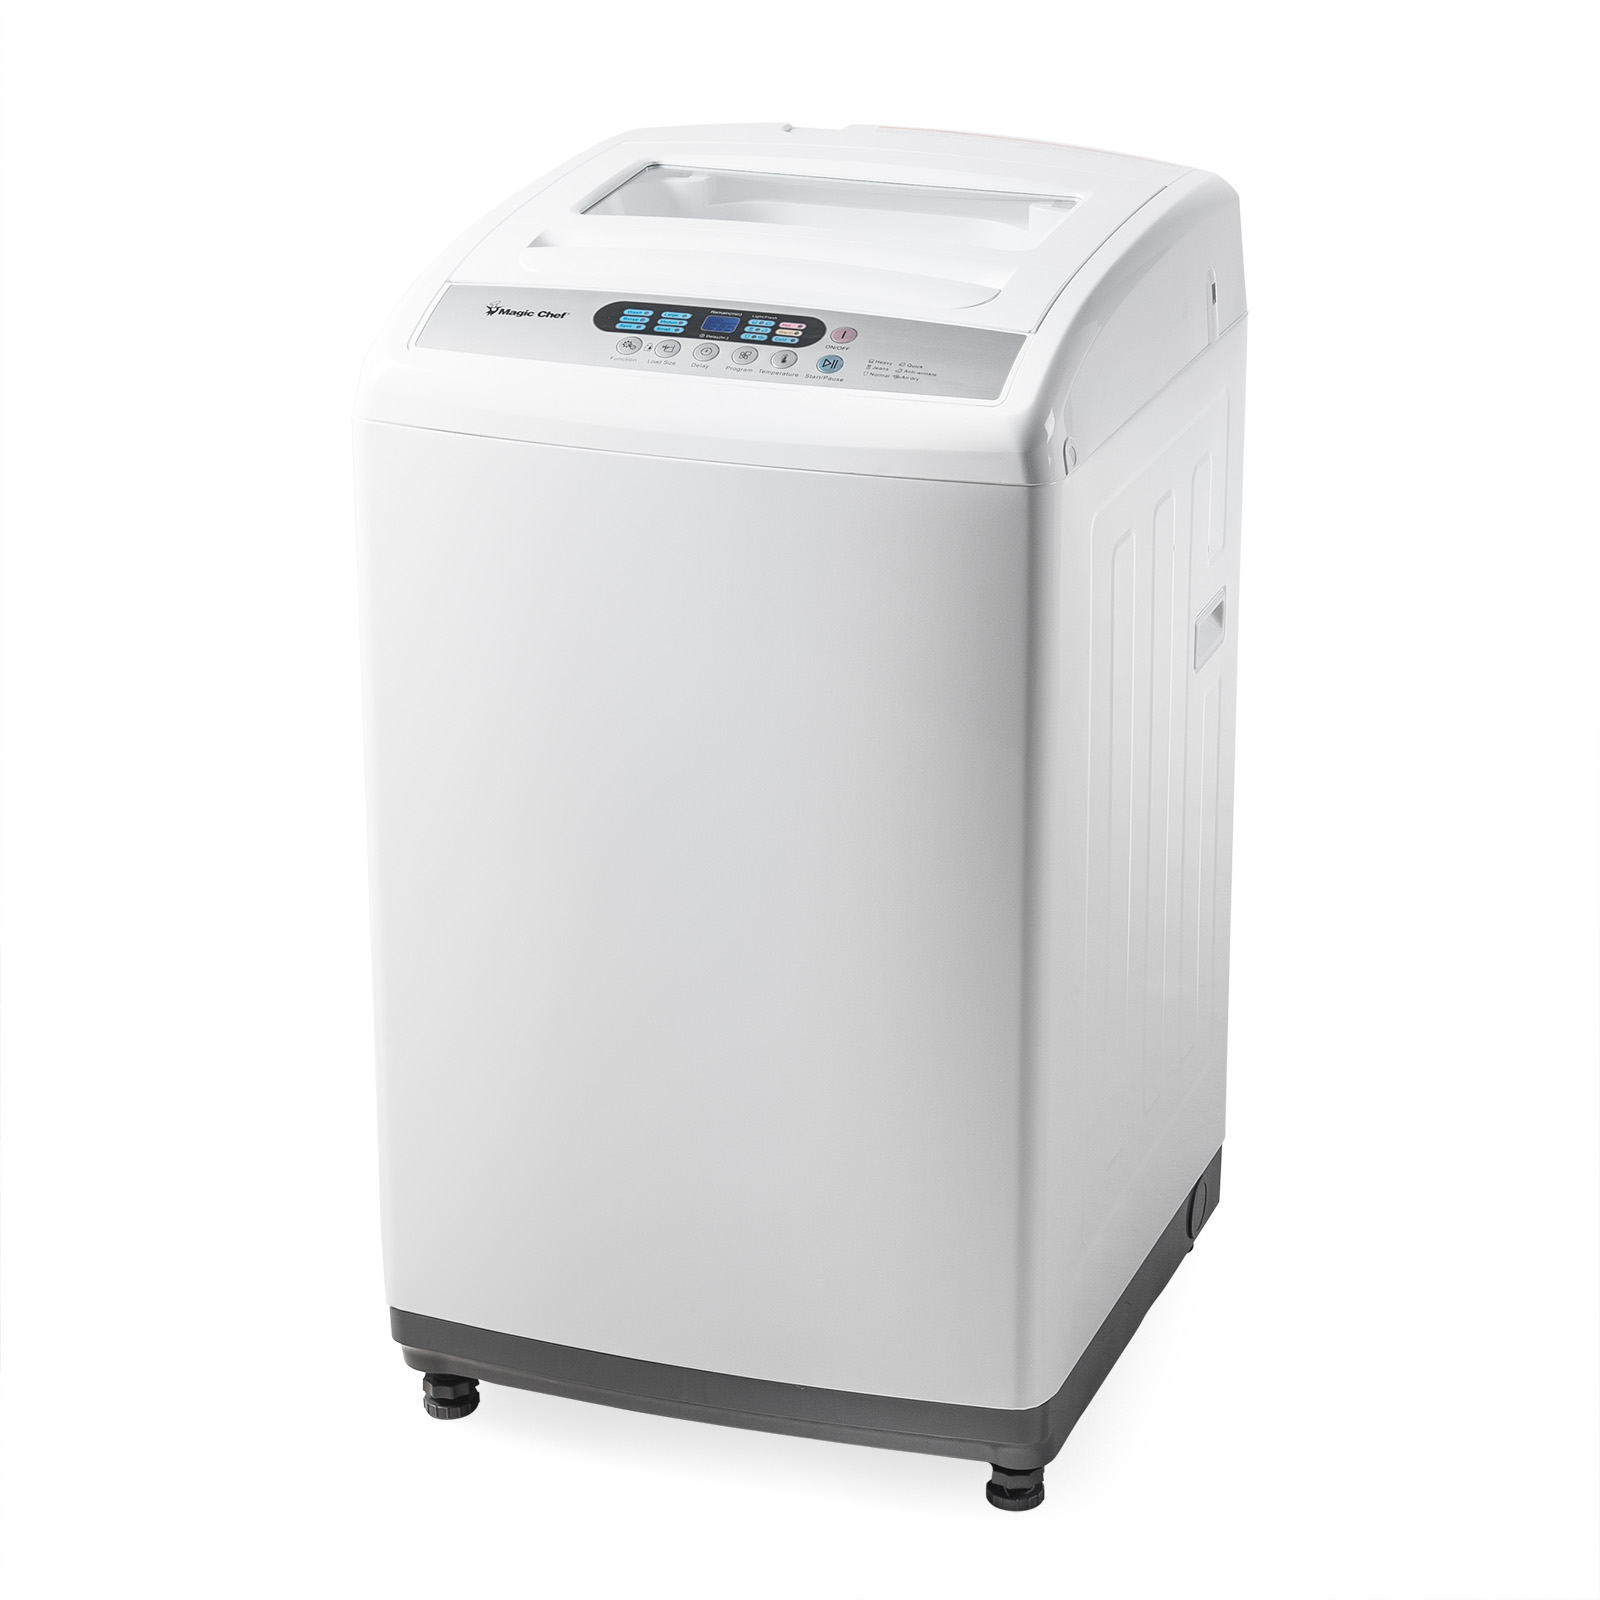 Magic Chef 2.1 cu ft Topload Compact Washer, White - image 5 of 18